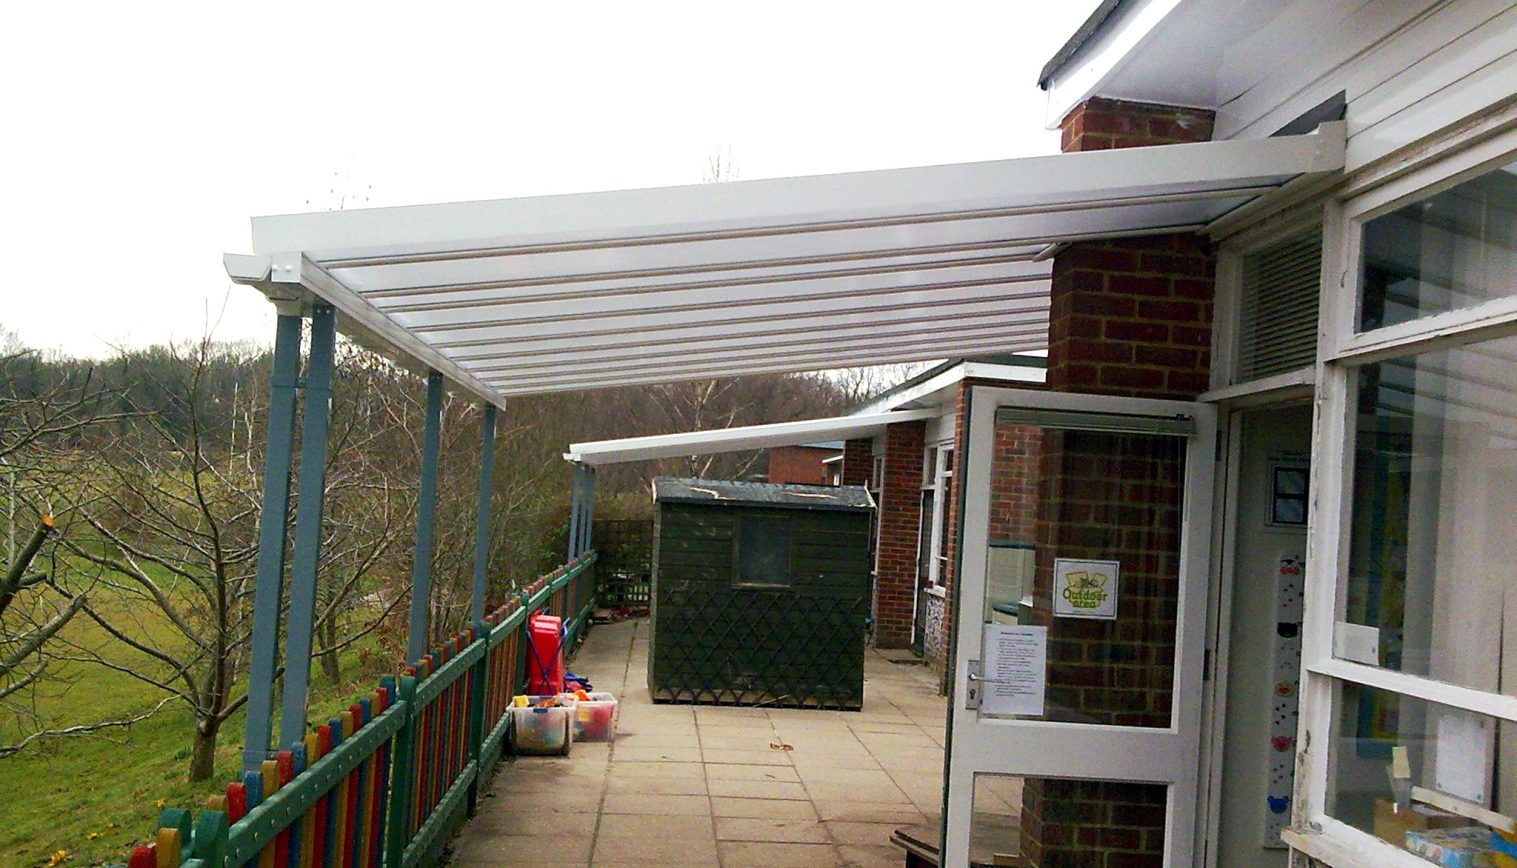 Harlands Primary School – Wall Mounted Canopies